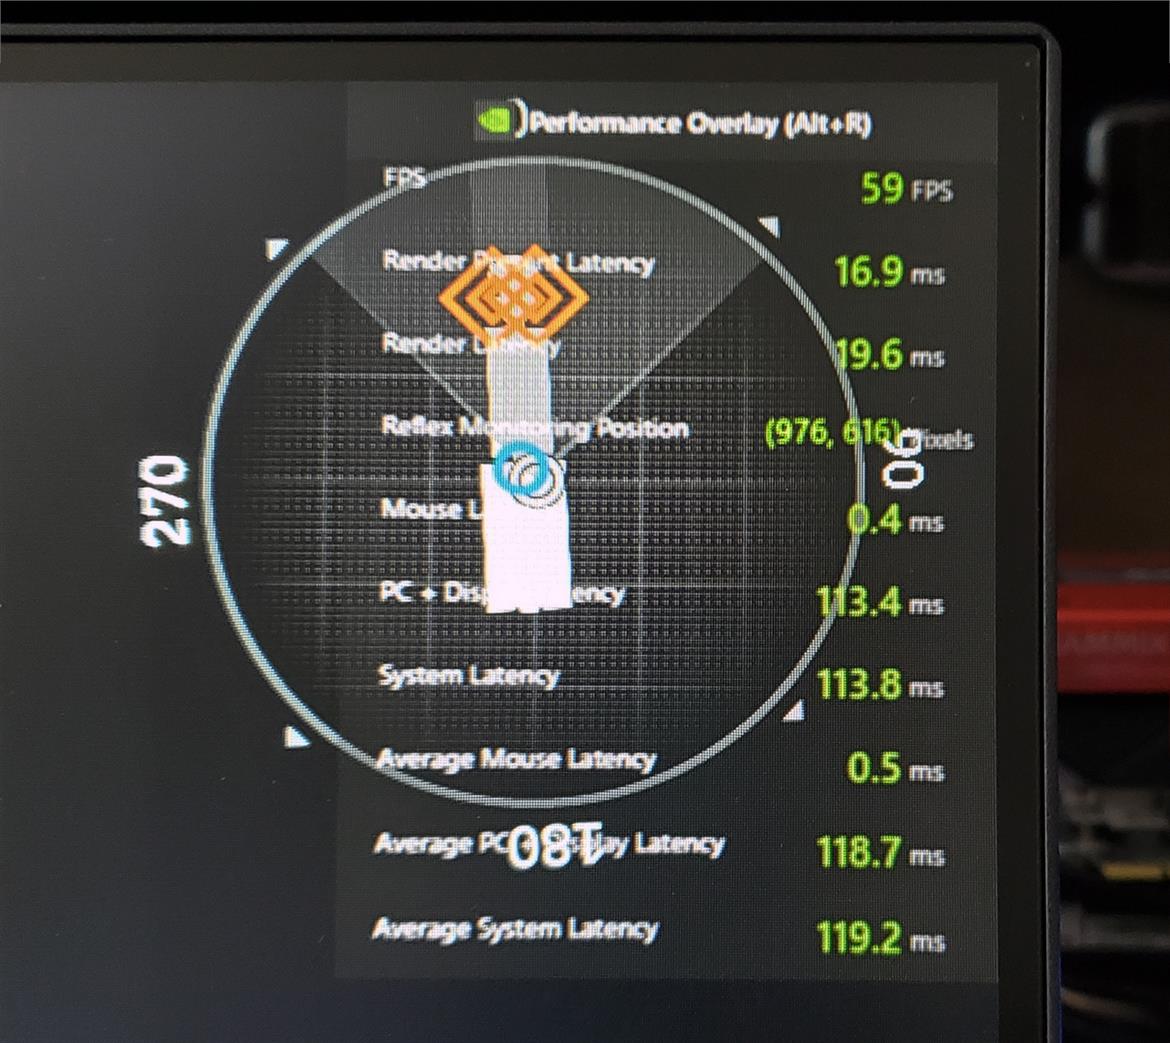 NVIDIA Reflex Tested: Low Latency, Precision Gaming At 360Hz